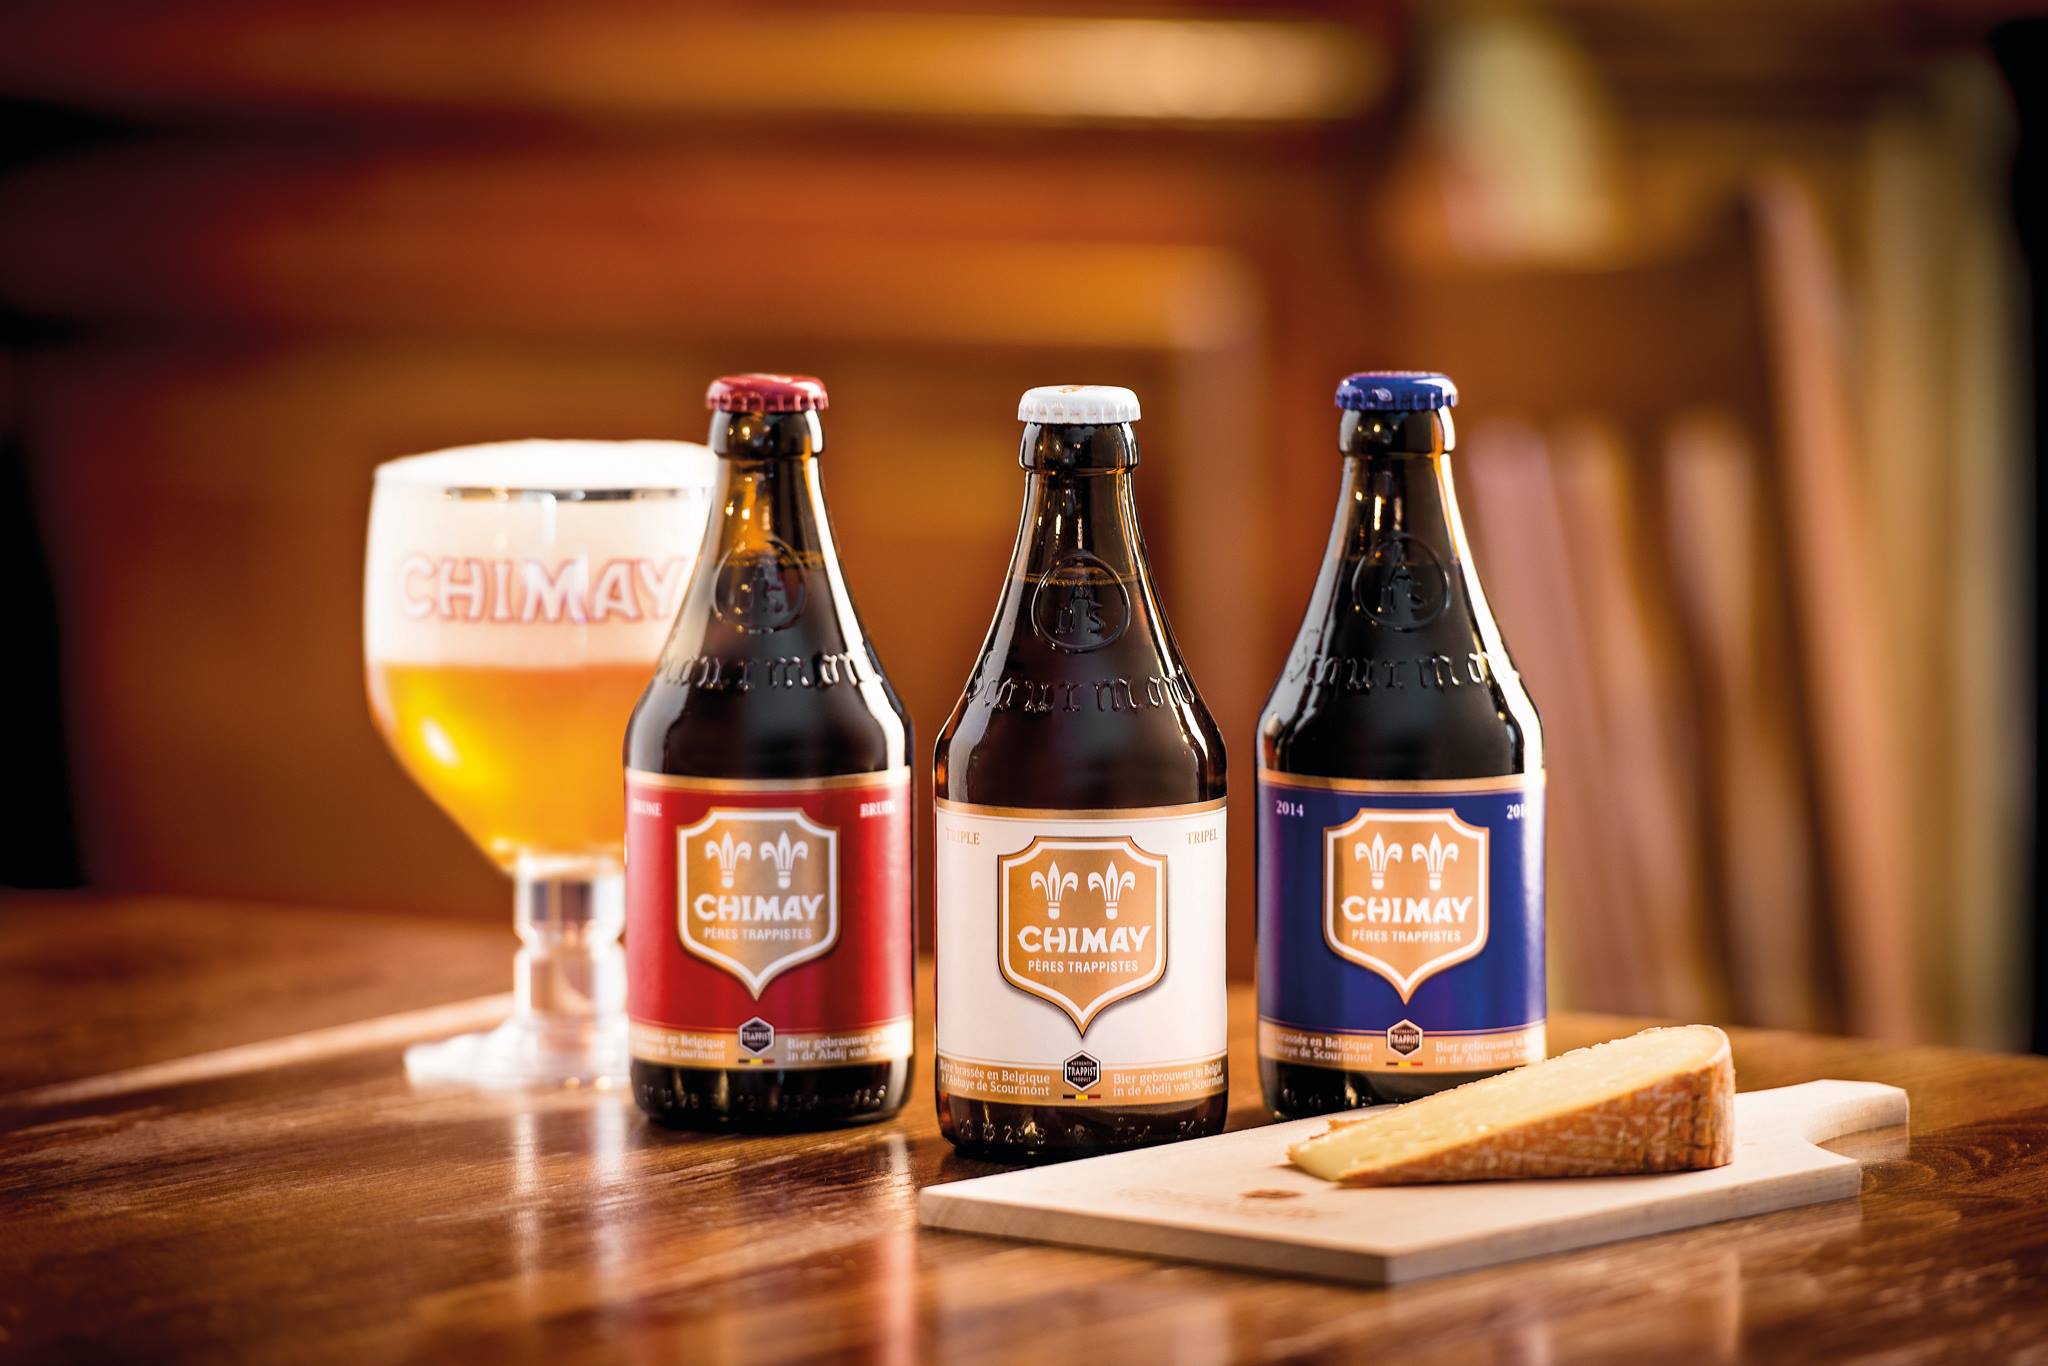 Three bottles of Chimay. (image courtesy of Chimay)